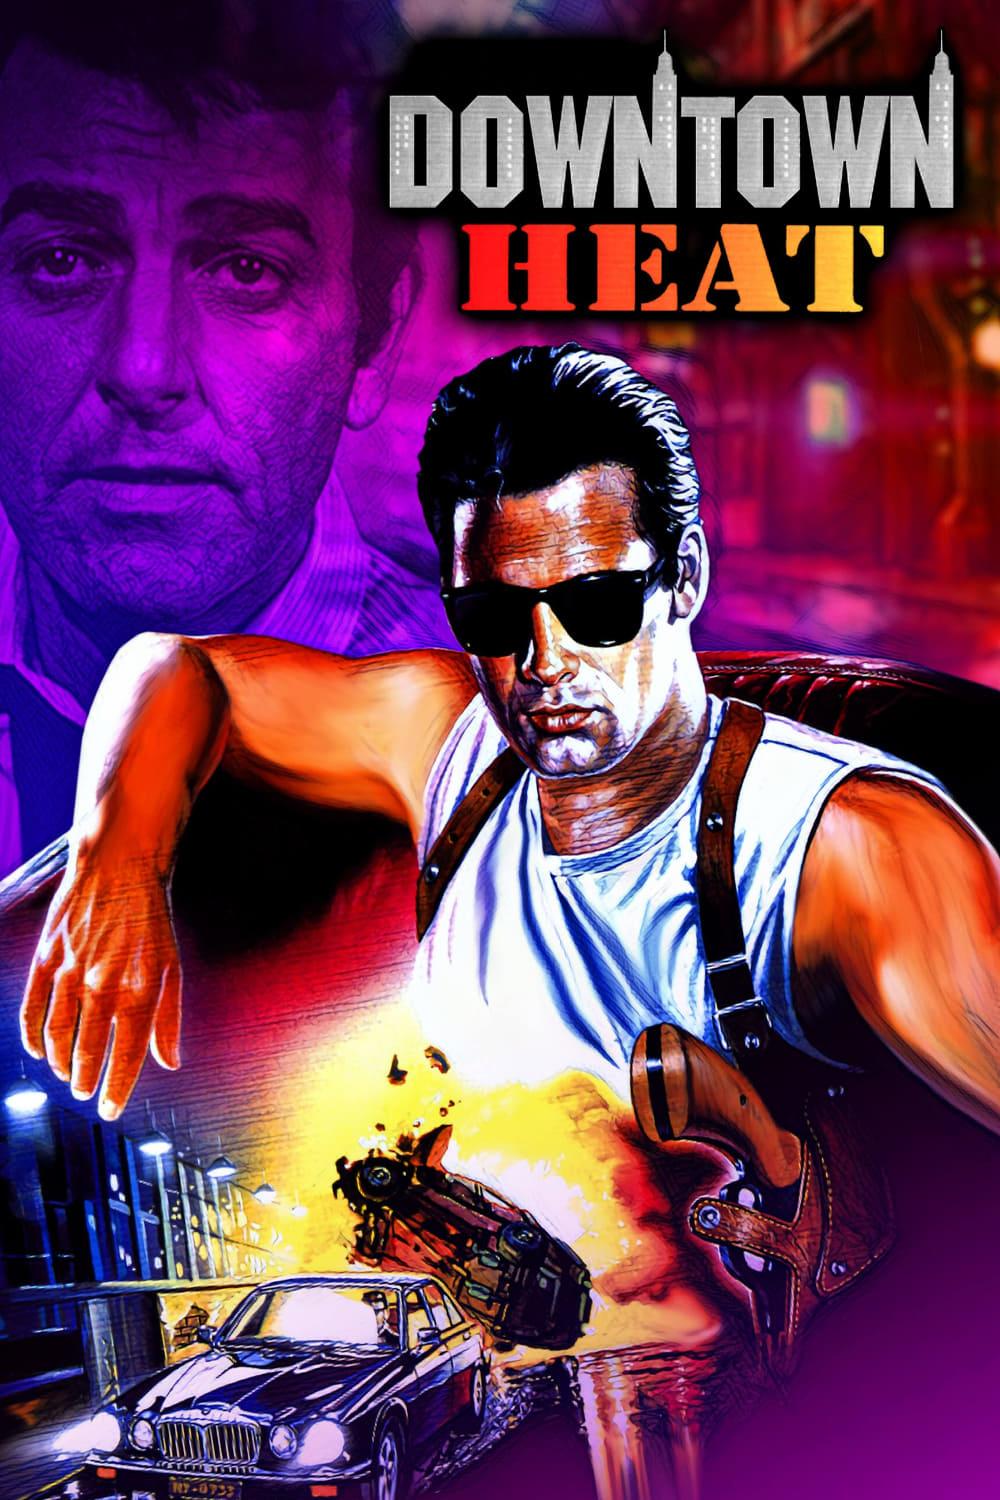 Downtown Heat poster